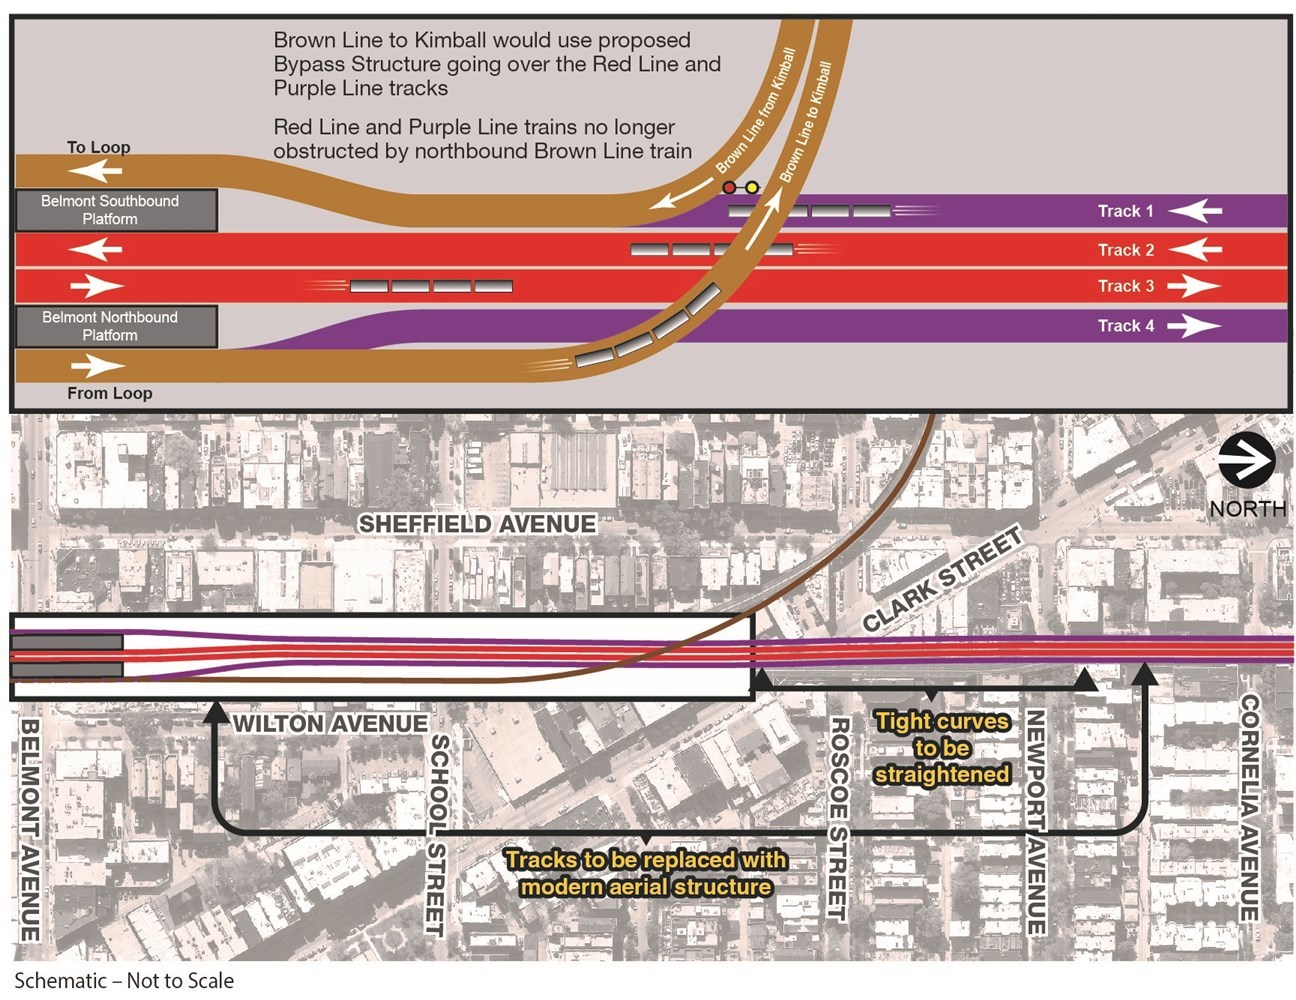 Clark Junction Configuration after bypass showing trains not interrupted by outbound Brown Line service